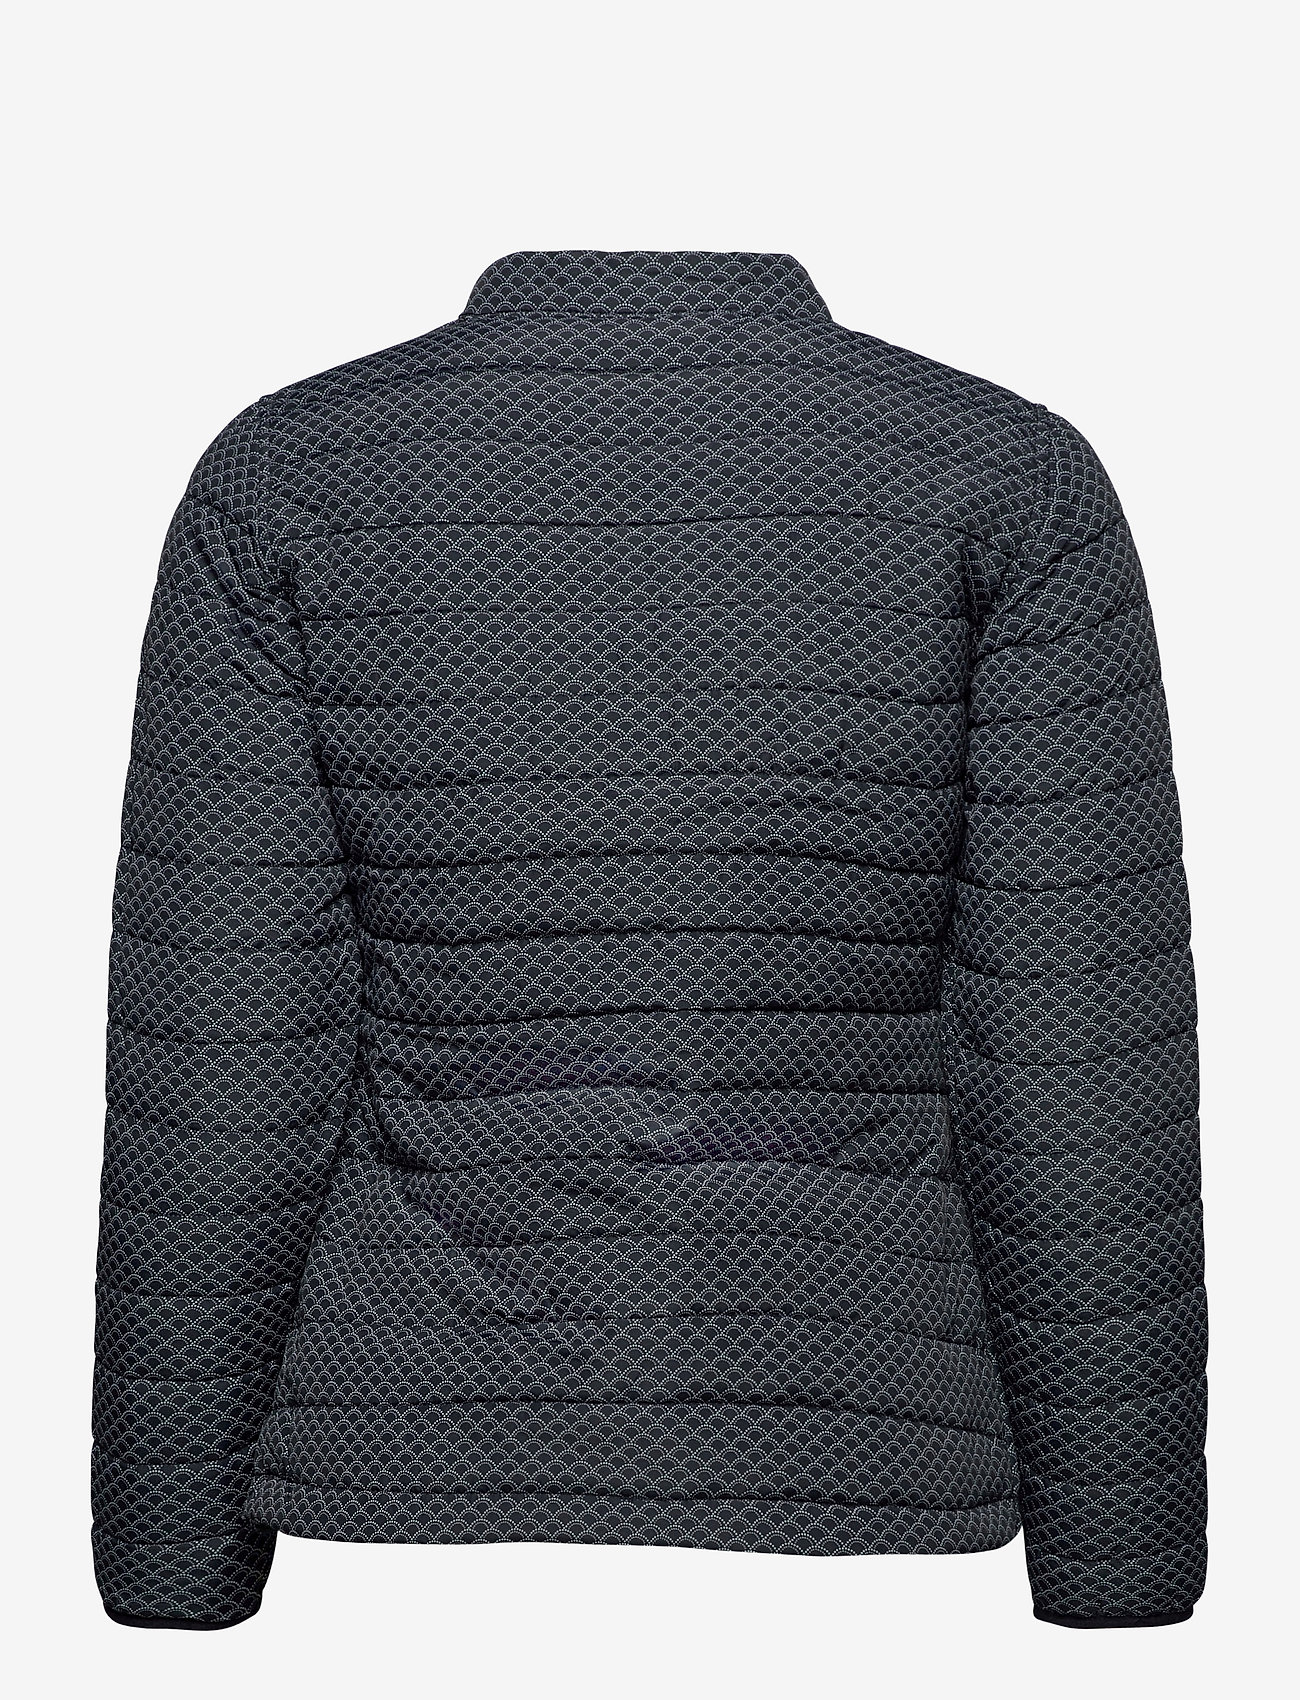 Abacus - Lds Etna padded reversible jkt - down- & padded jackets - navy - 1